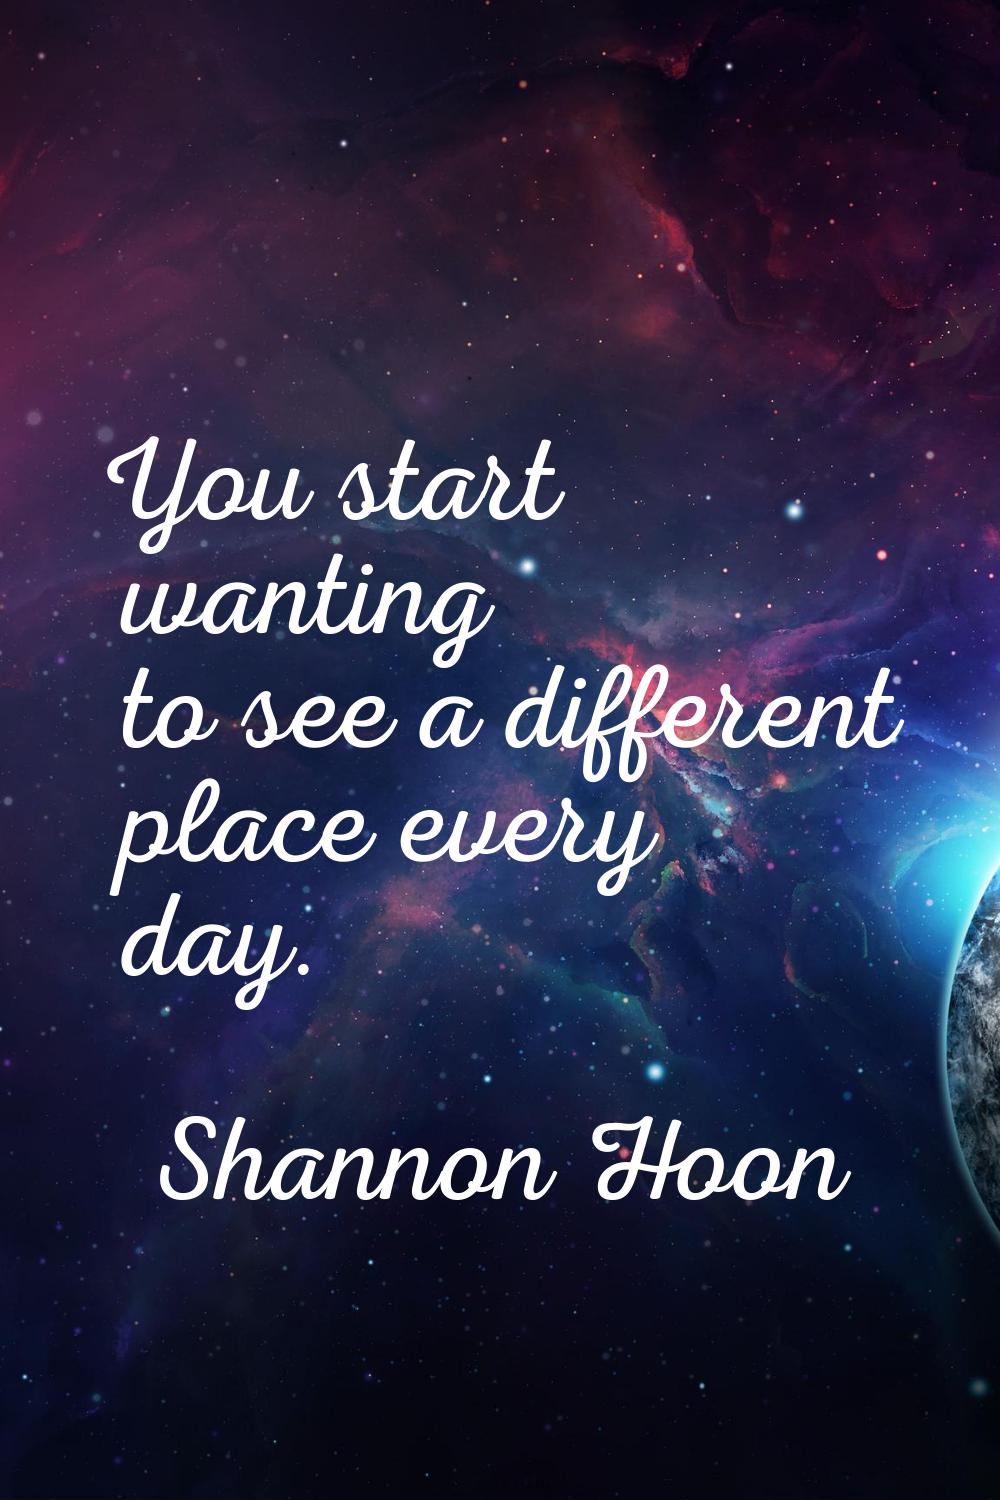 You start wanting to see a different place every day.